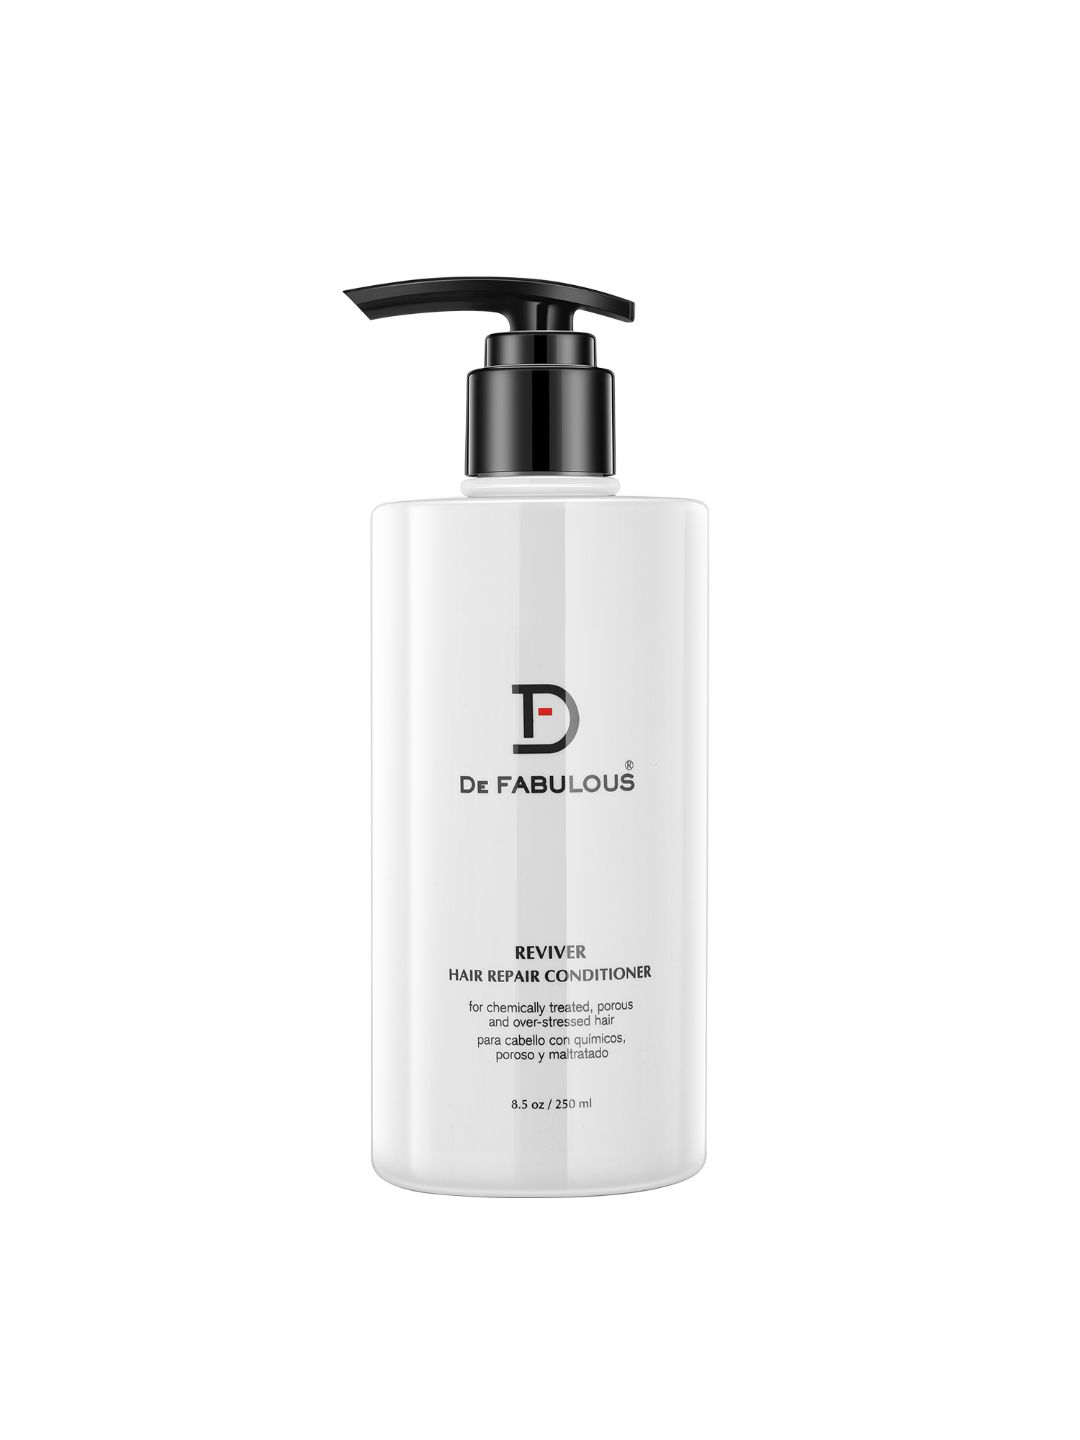 De Fabulous Unisex Reviver Hair Repair Conditioner with Soy & Oat 250 ml Price in India